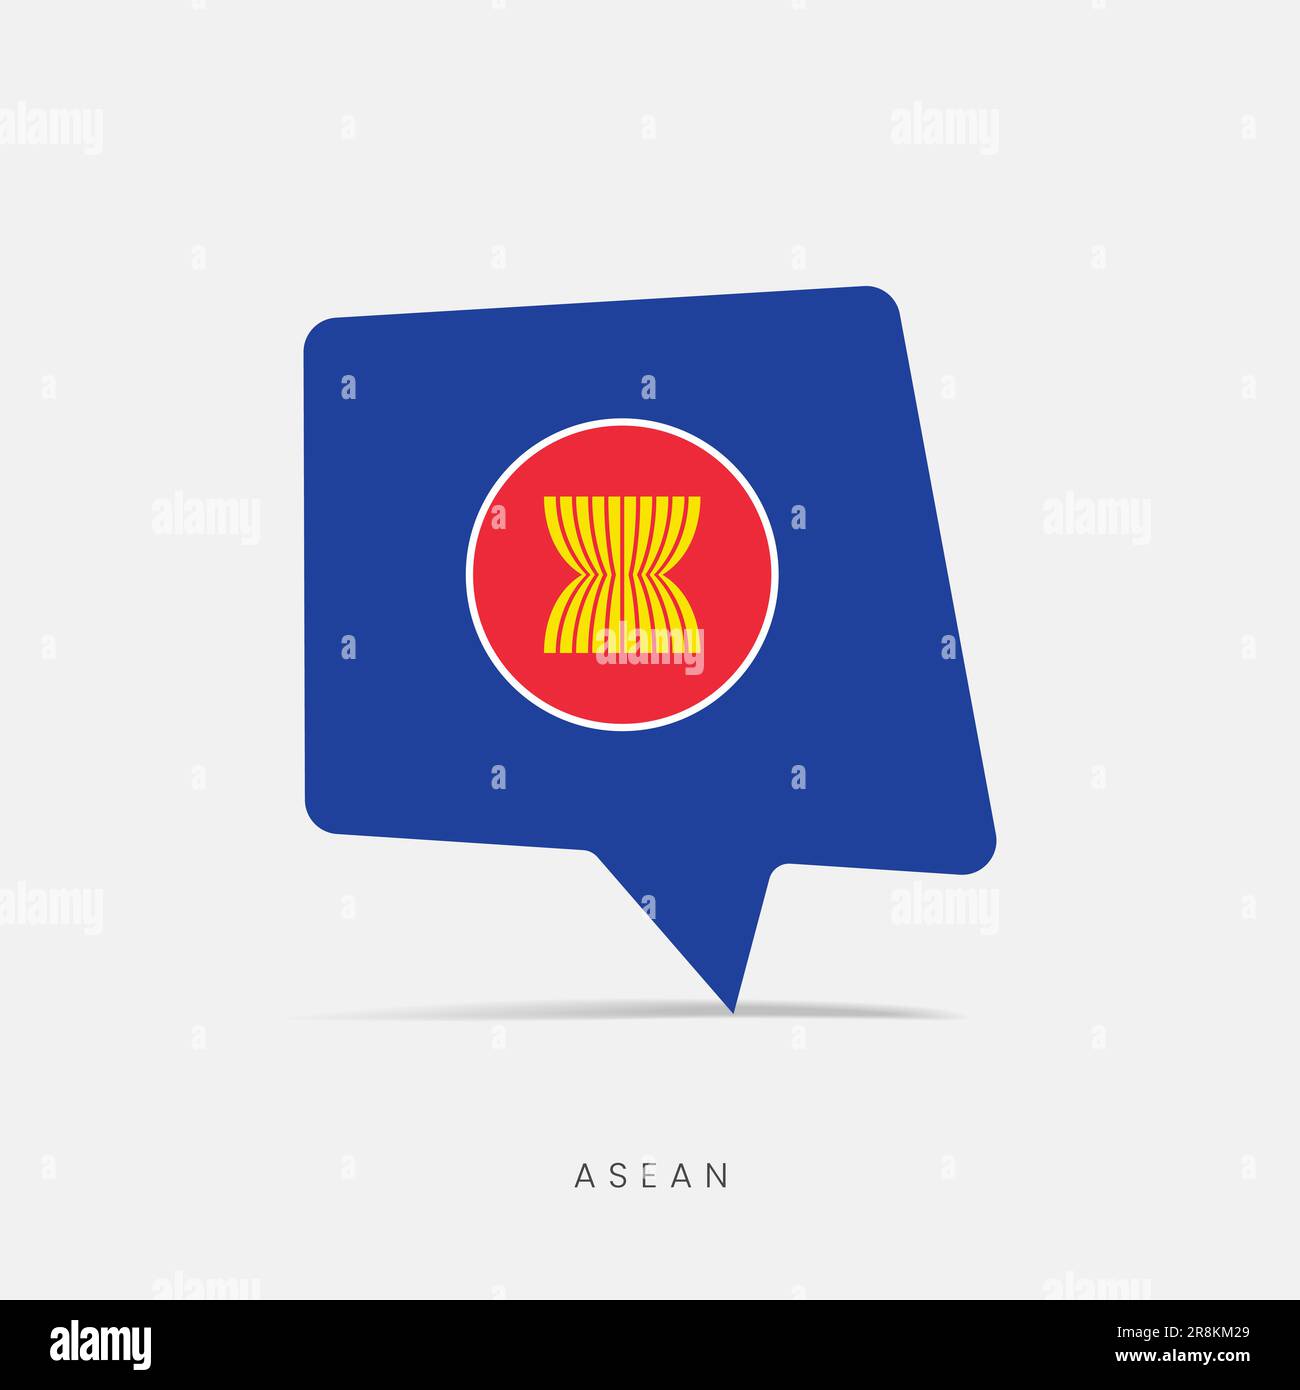 ASEAN flag bubble chat icon Stock Vector